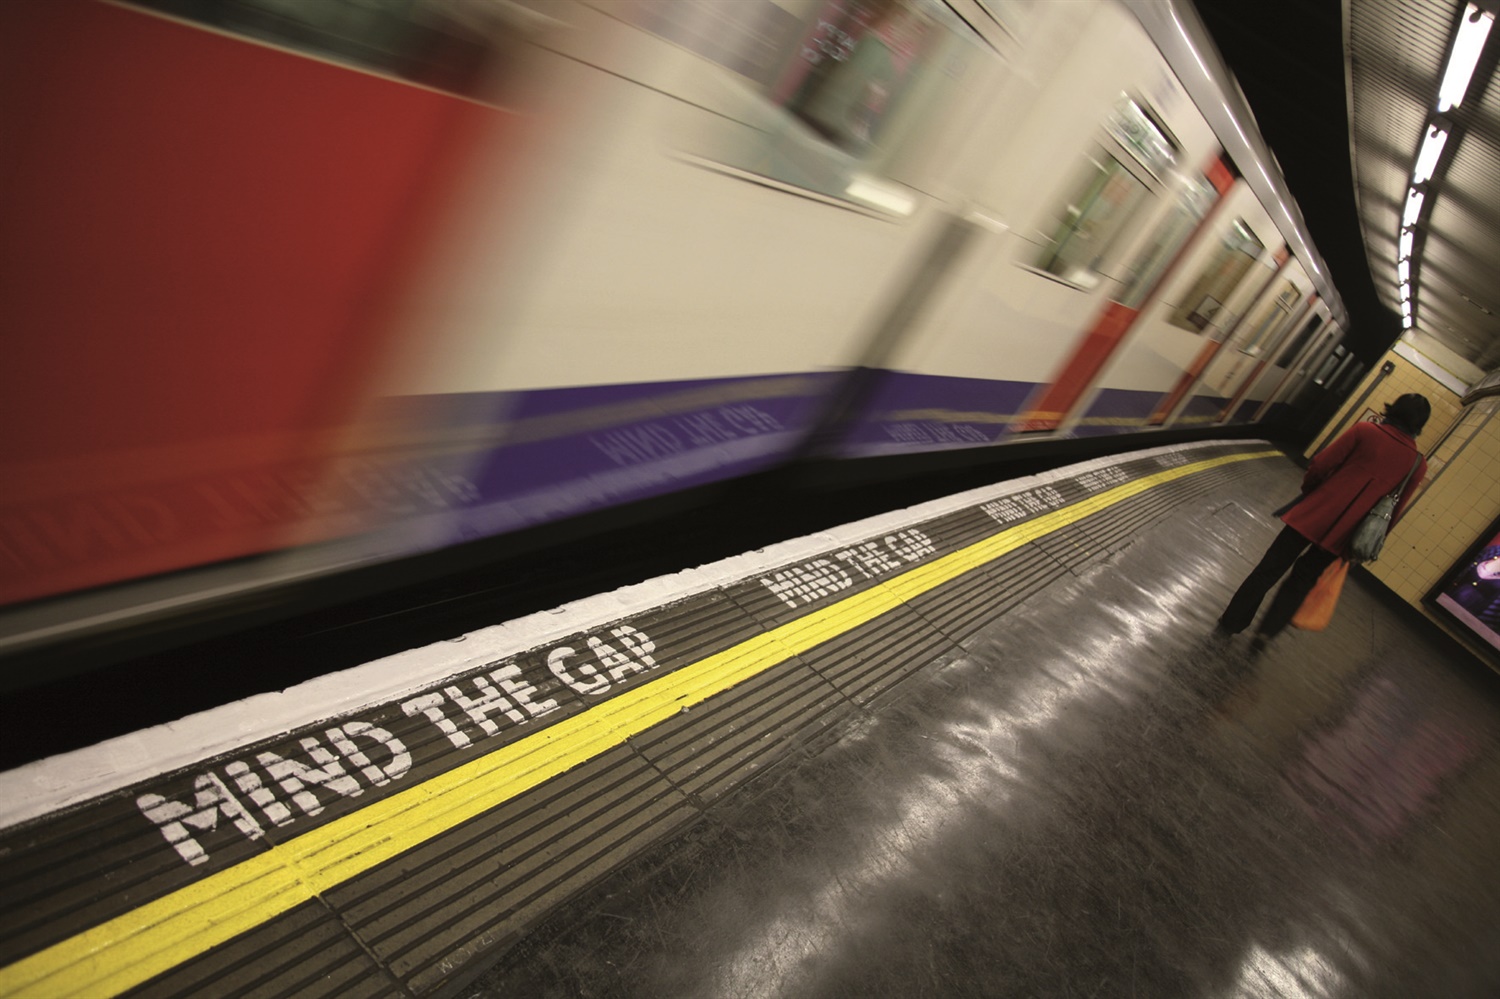 TfL seeks bidders for £3.6m contract to repair Piccadilly Line rolling stock